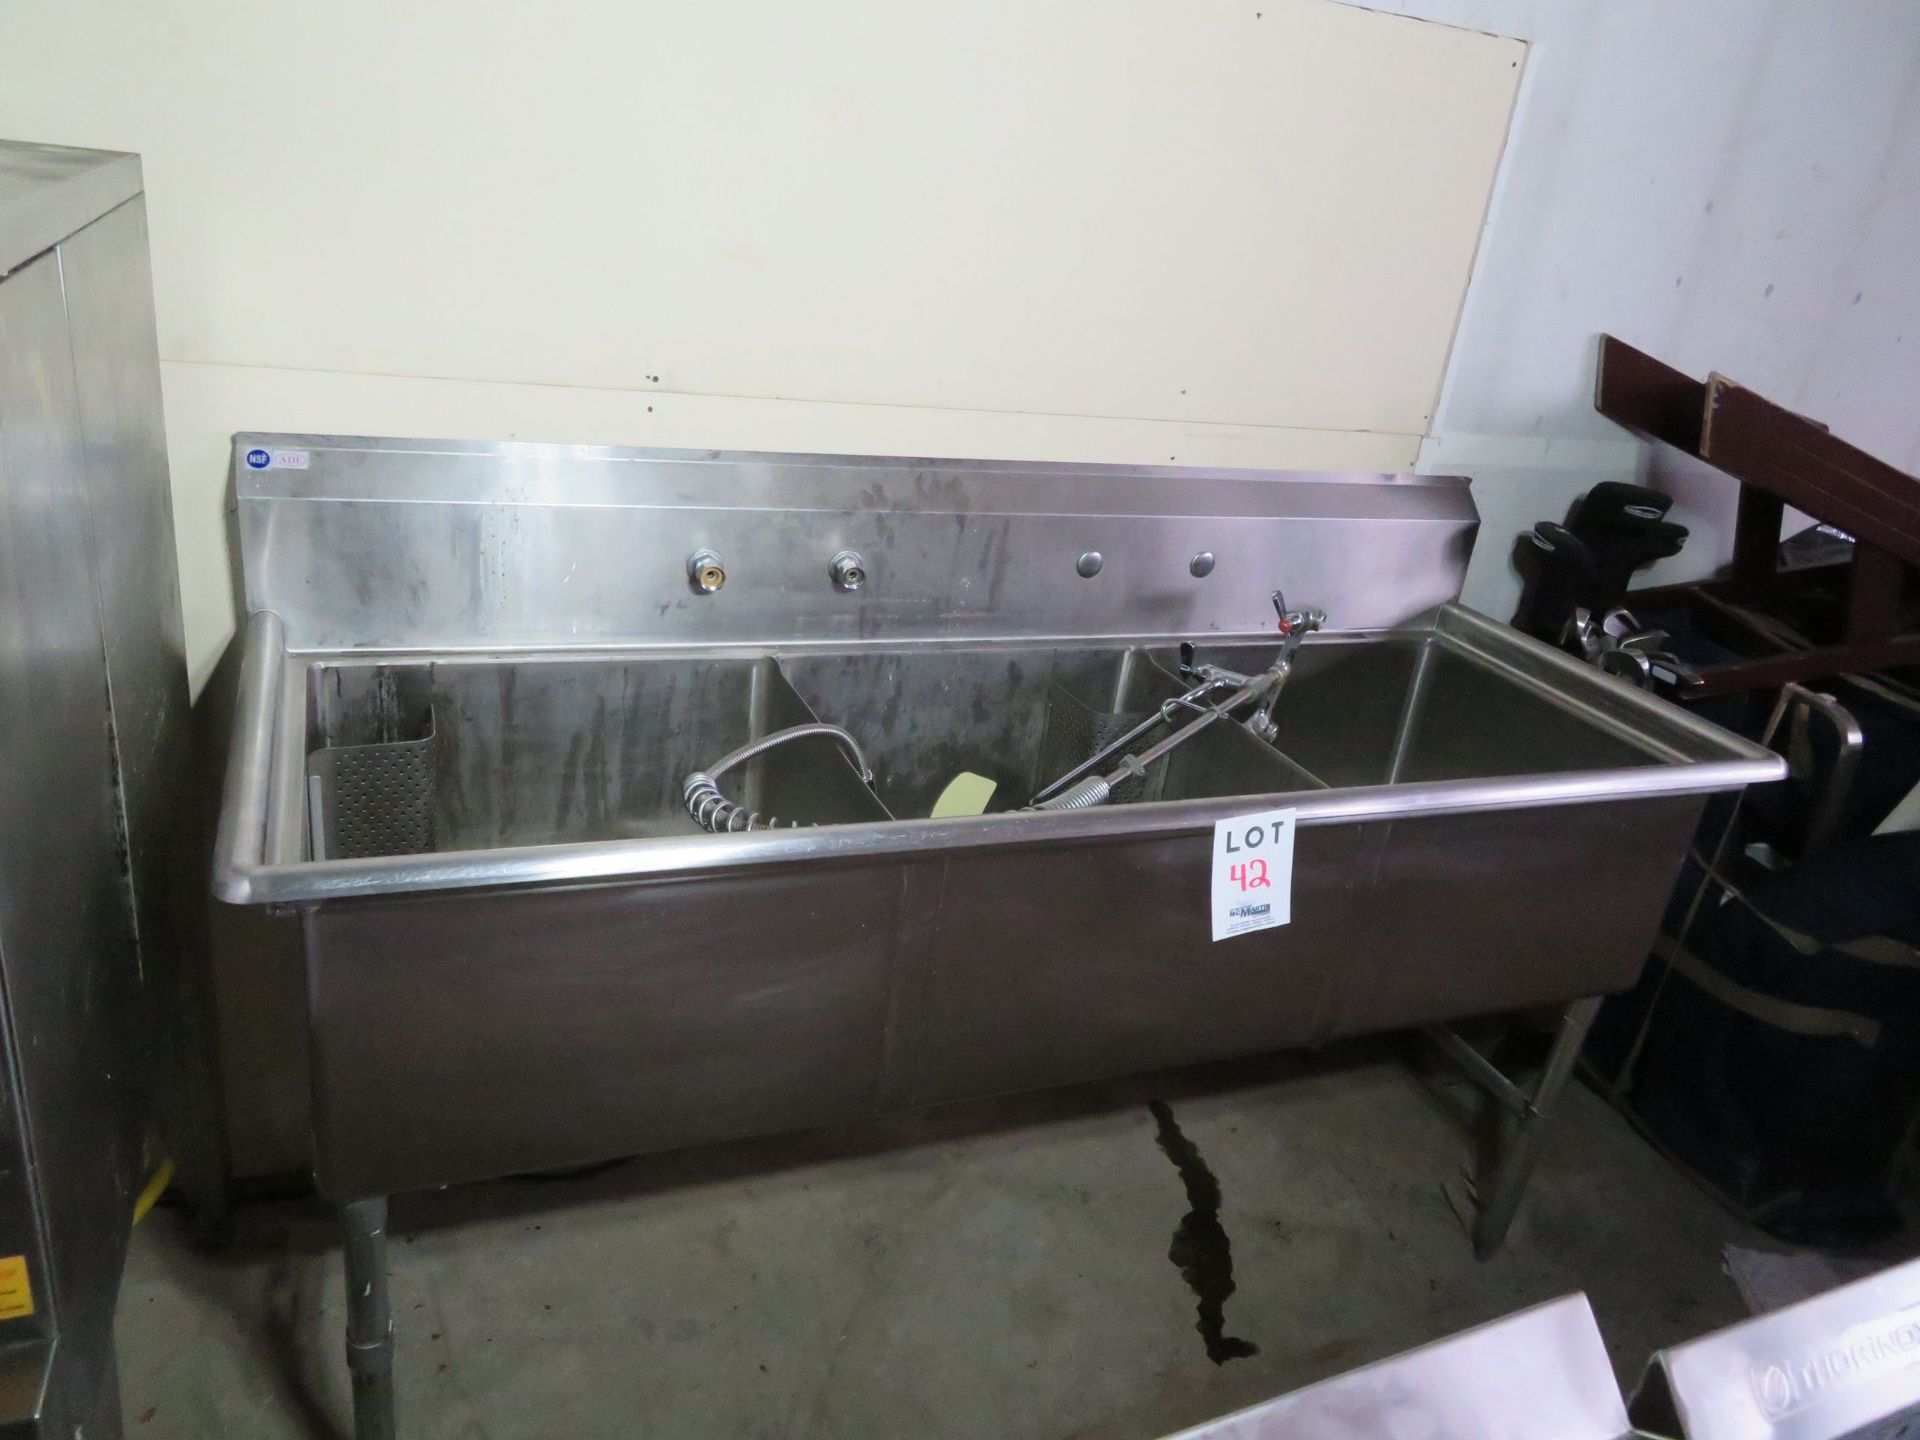 Stainless steel sink with rinser and faucet approx. 77"w x 29"d